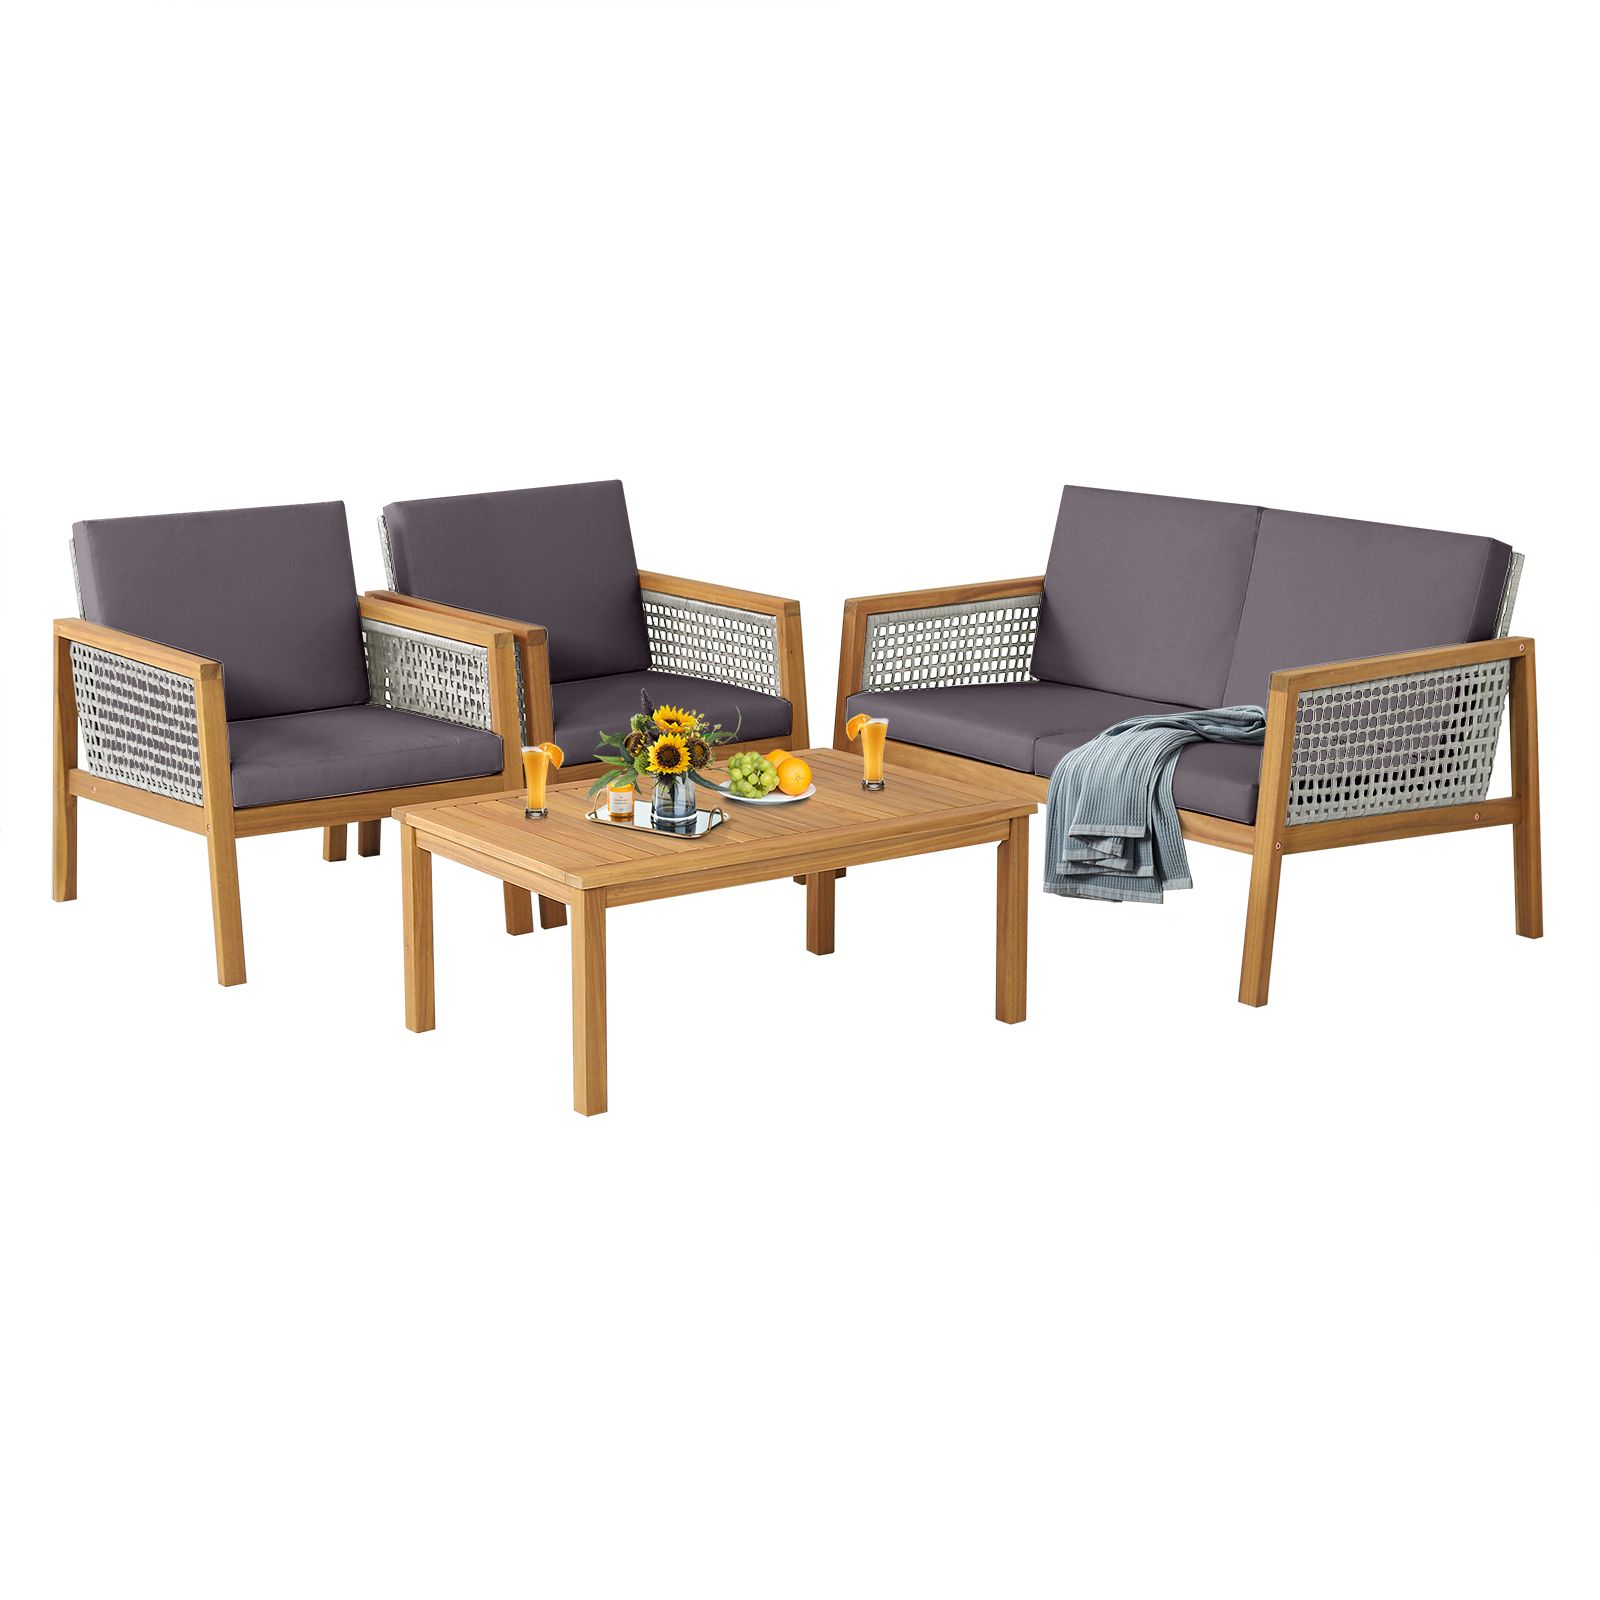 4 Pieces Wicker Patio Furniture Set with Loveseat Coffee Table and Chairs